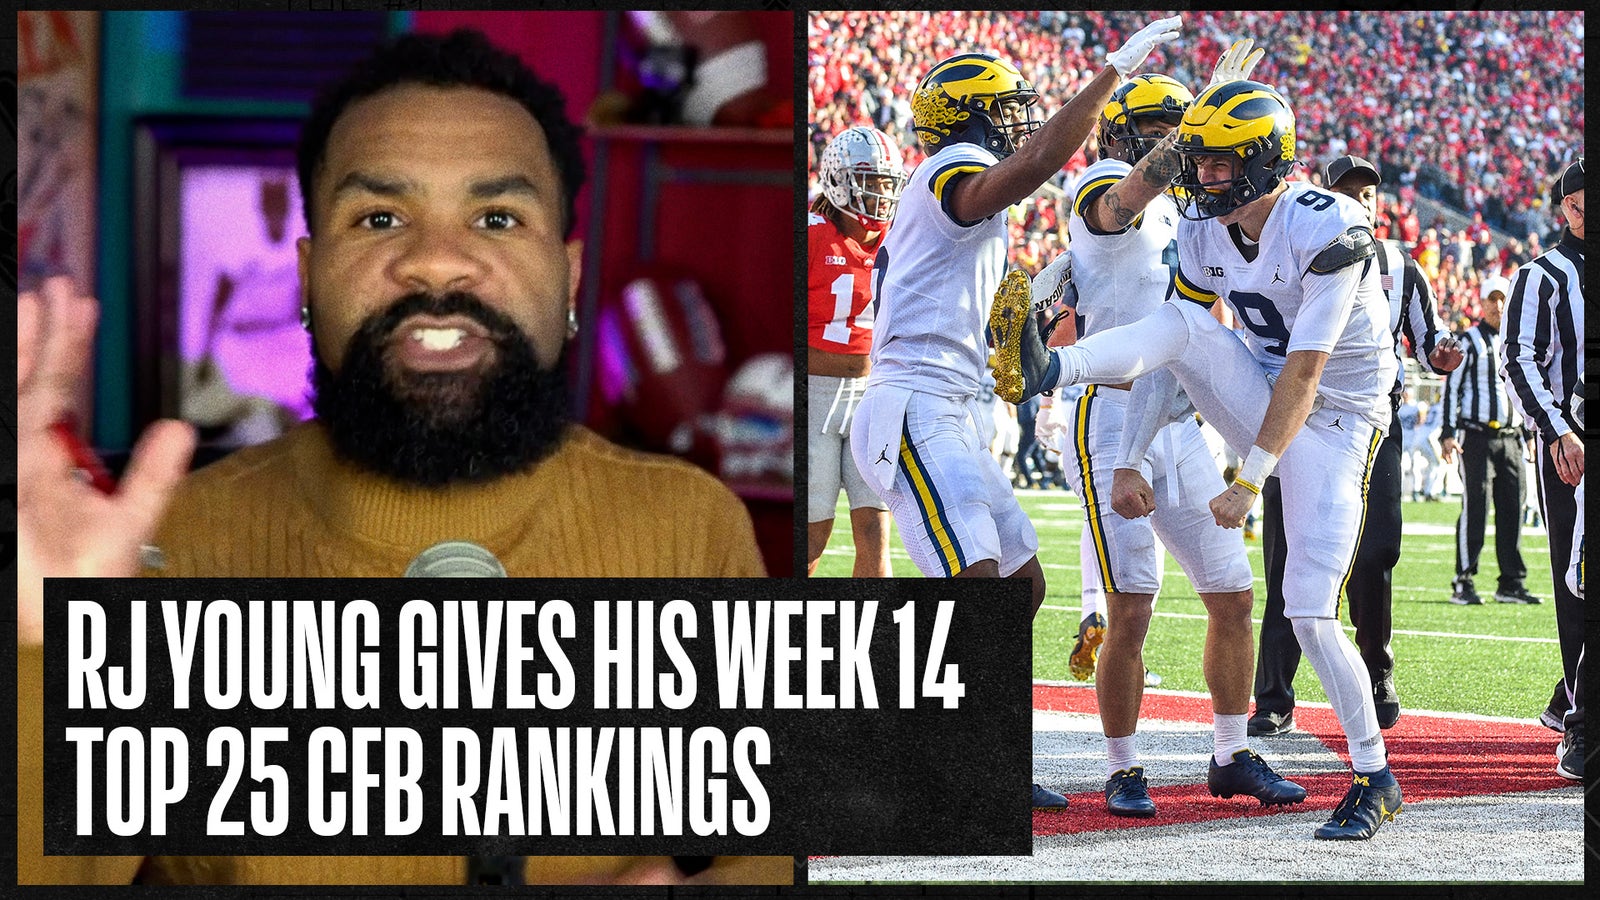 RJ's Week 14 Top 25: Michigan moves up to 2, Ohio State falls